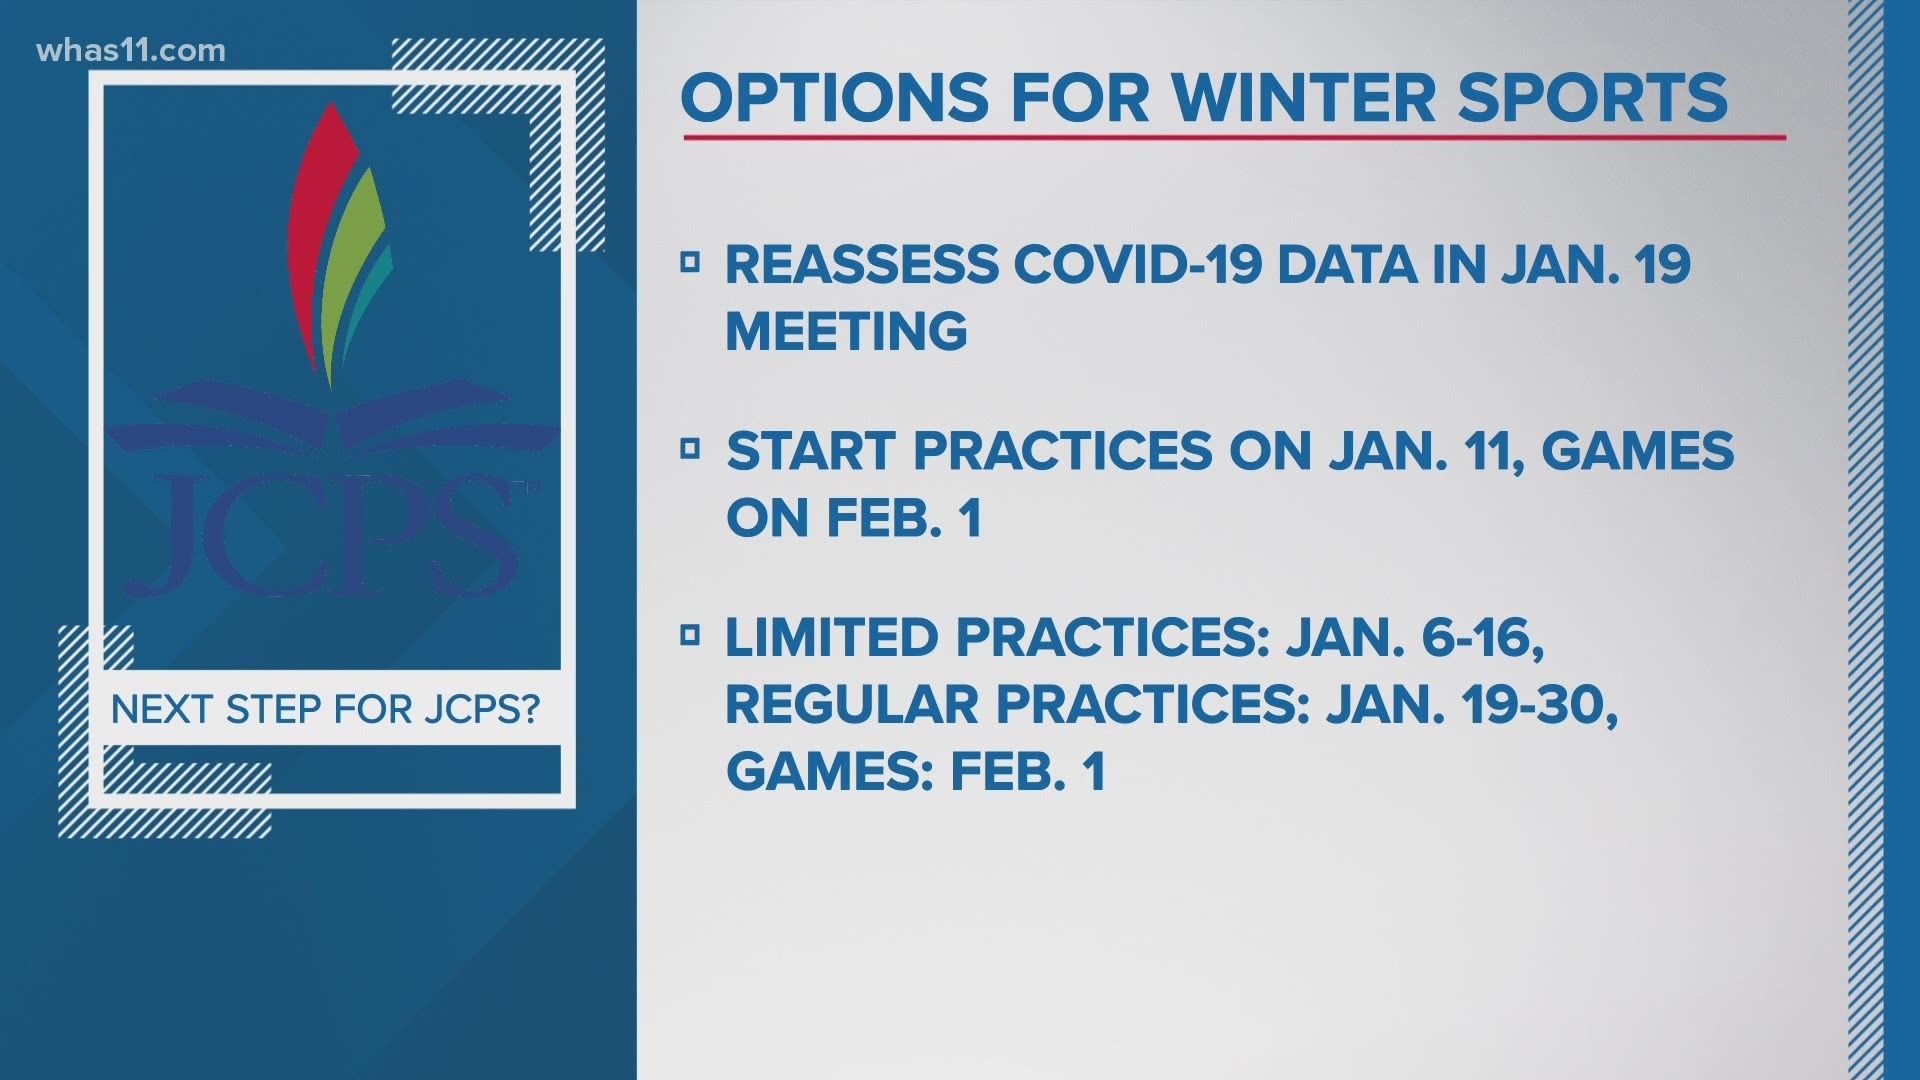 The JCPS Board of Education will consider three options for winter sports.